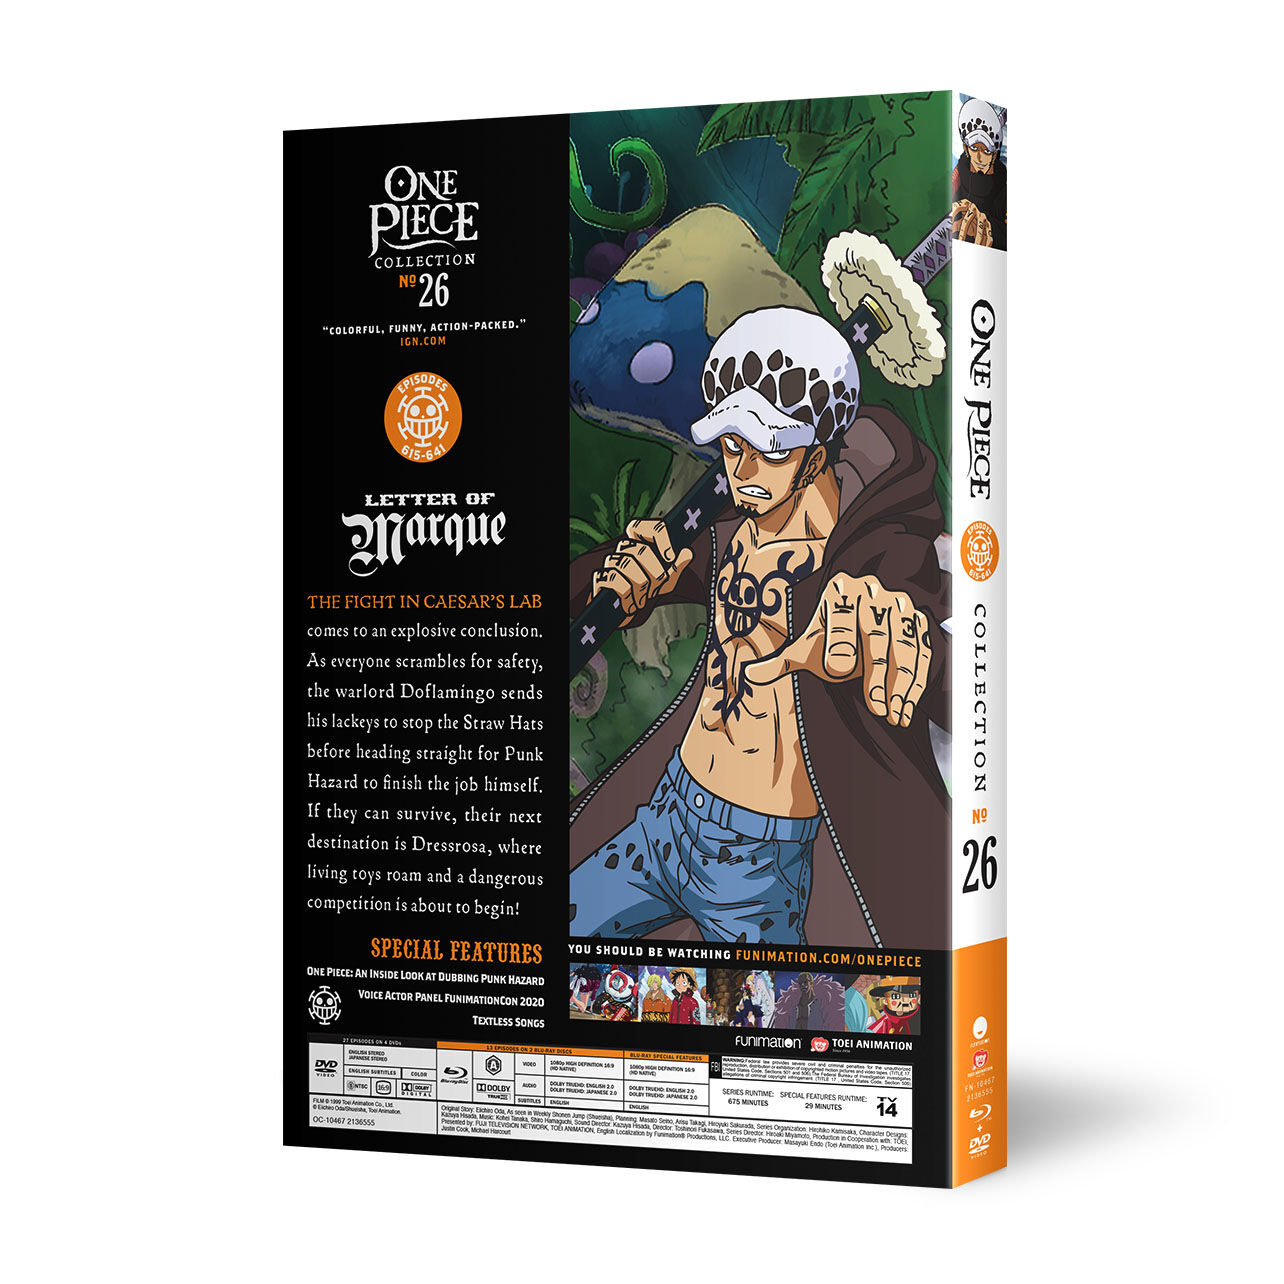 One Piece - Collection 26 - Blu-ray + DVD | Crunchyroll Store